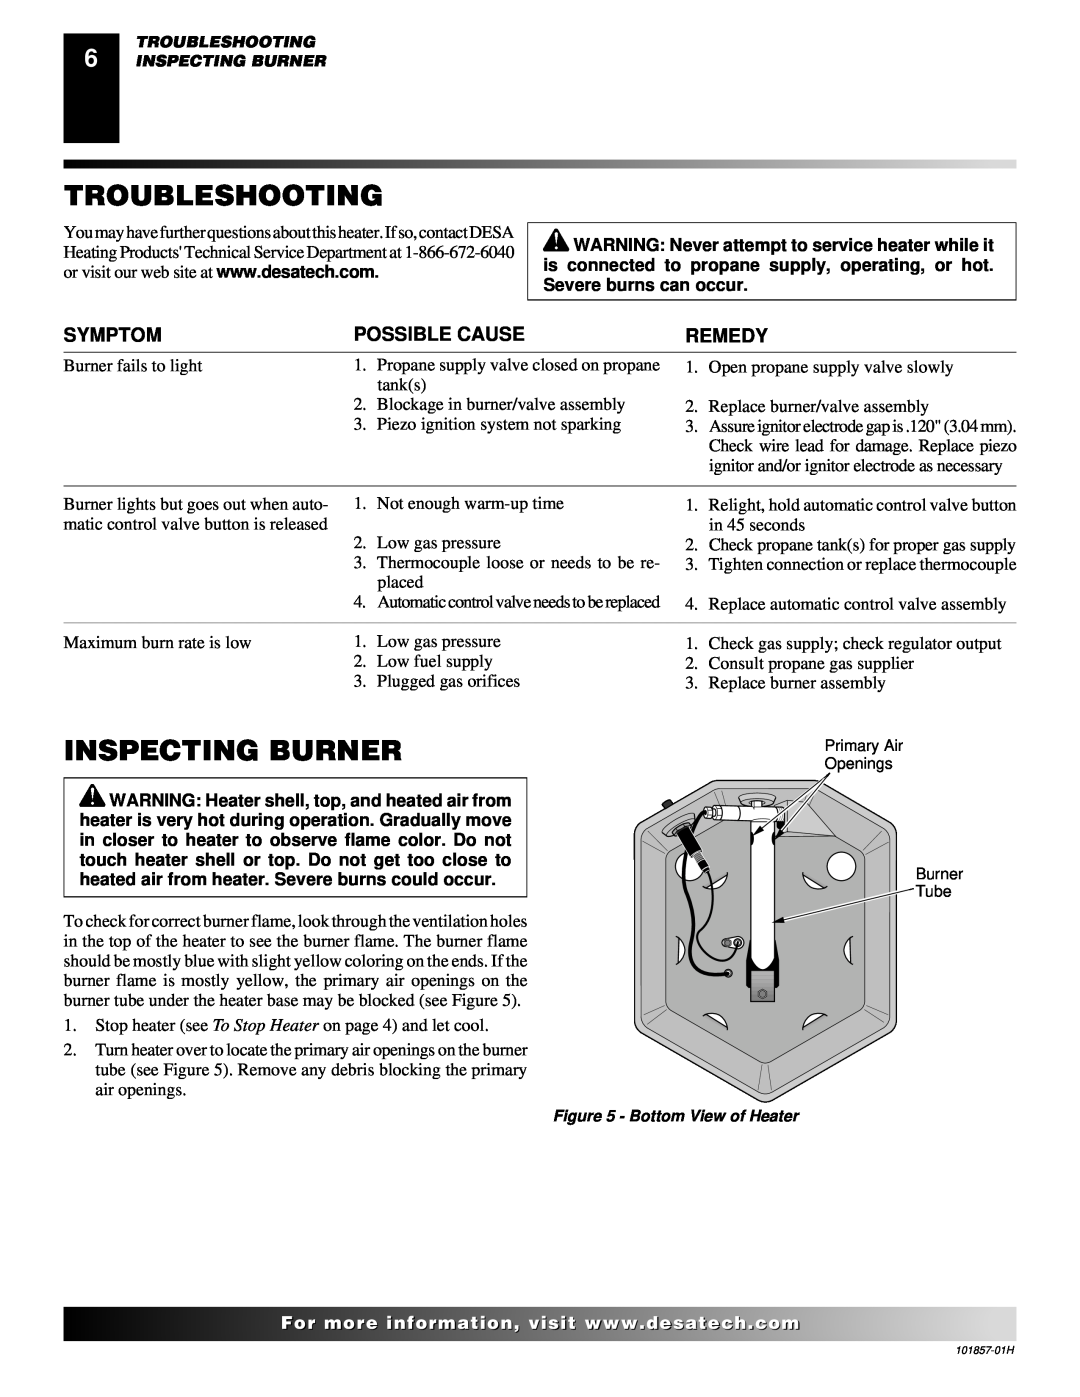 Desa TC25 owner manual Troubleshooting, Inspecting Burner, Symptom, Possible Cause, Remedy 